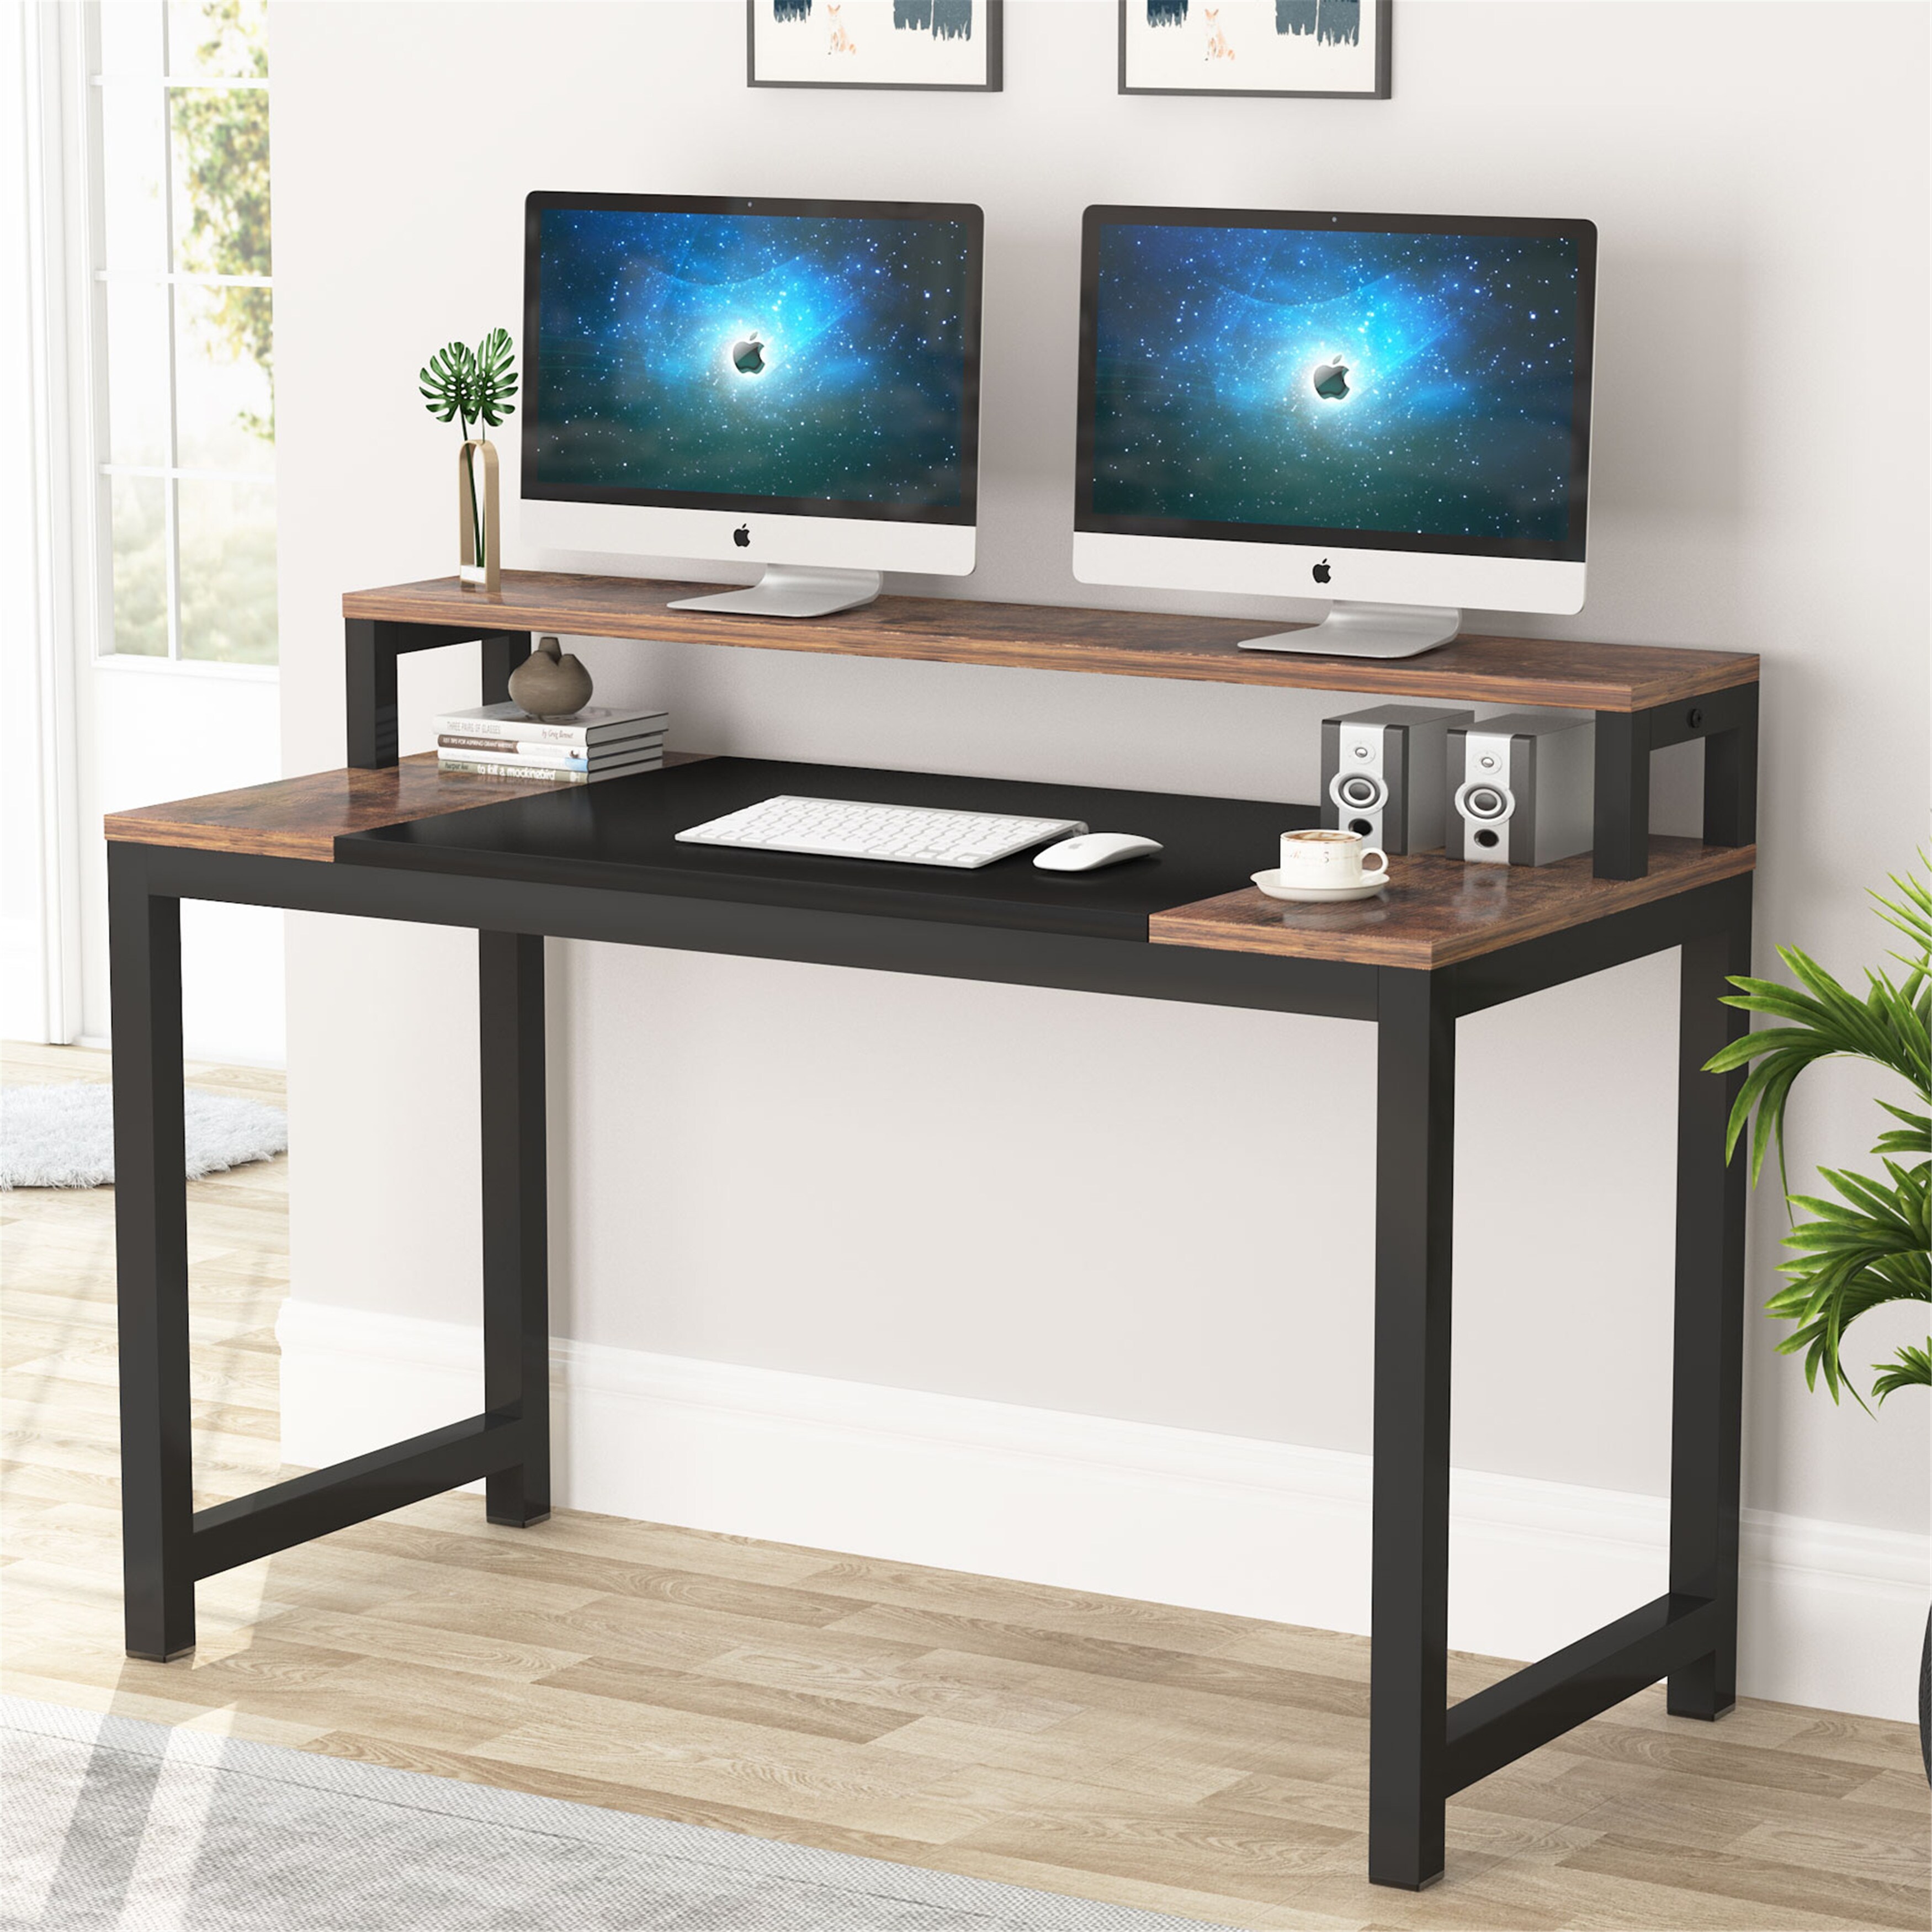 47 x 24 x 29 Inch FunDiscount Home Office Computer Desk with One-Tier Storage Shelves Modern Large Wood Top Student Studying Writing Desk Workstation Under Laptop Table Bookshelf 